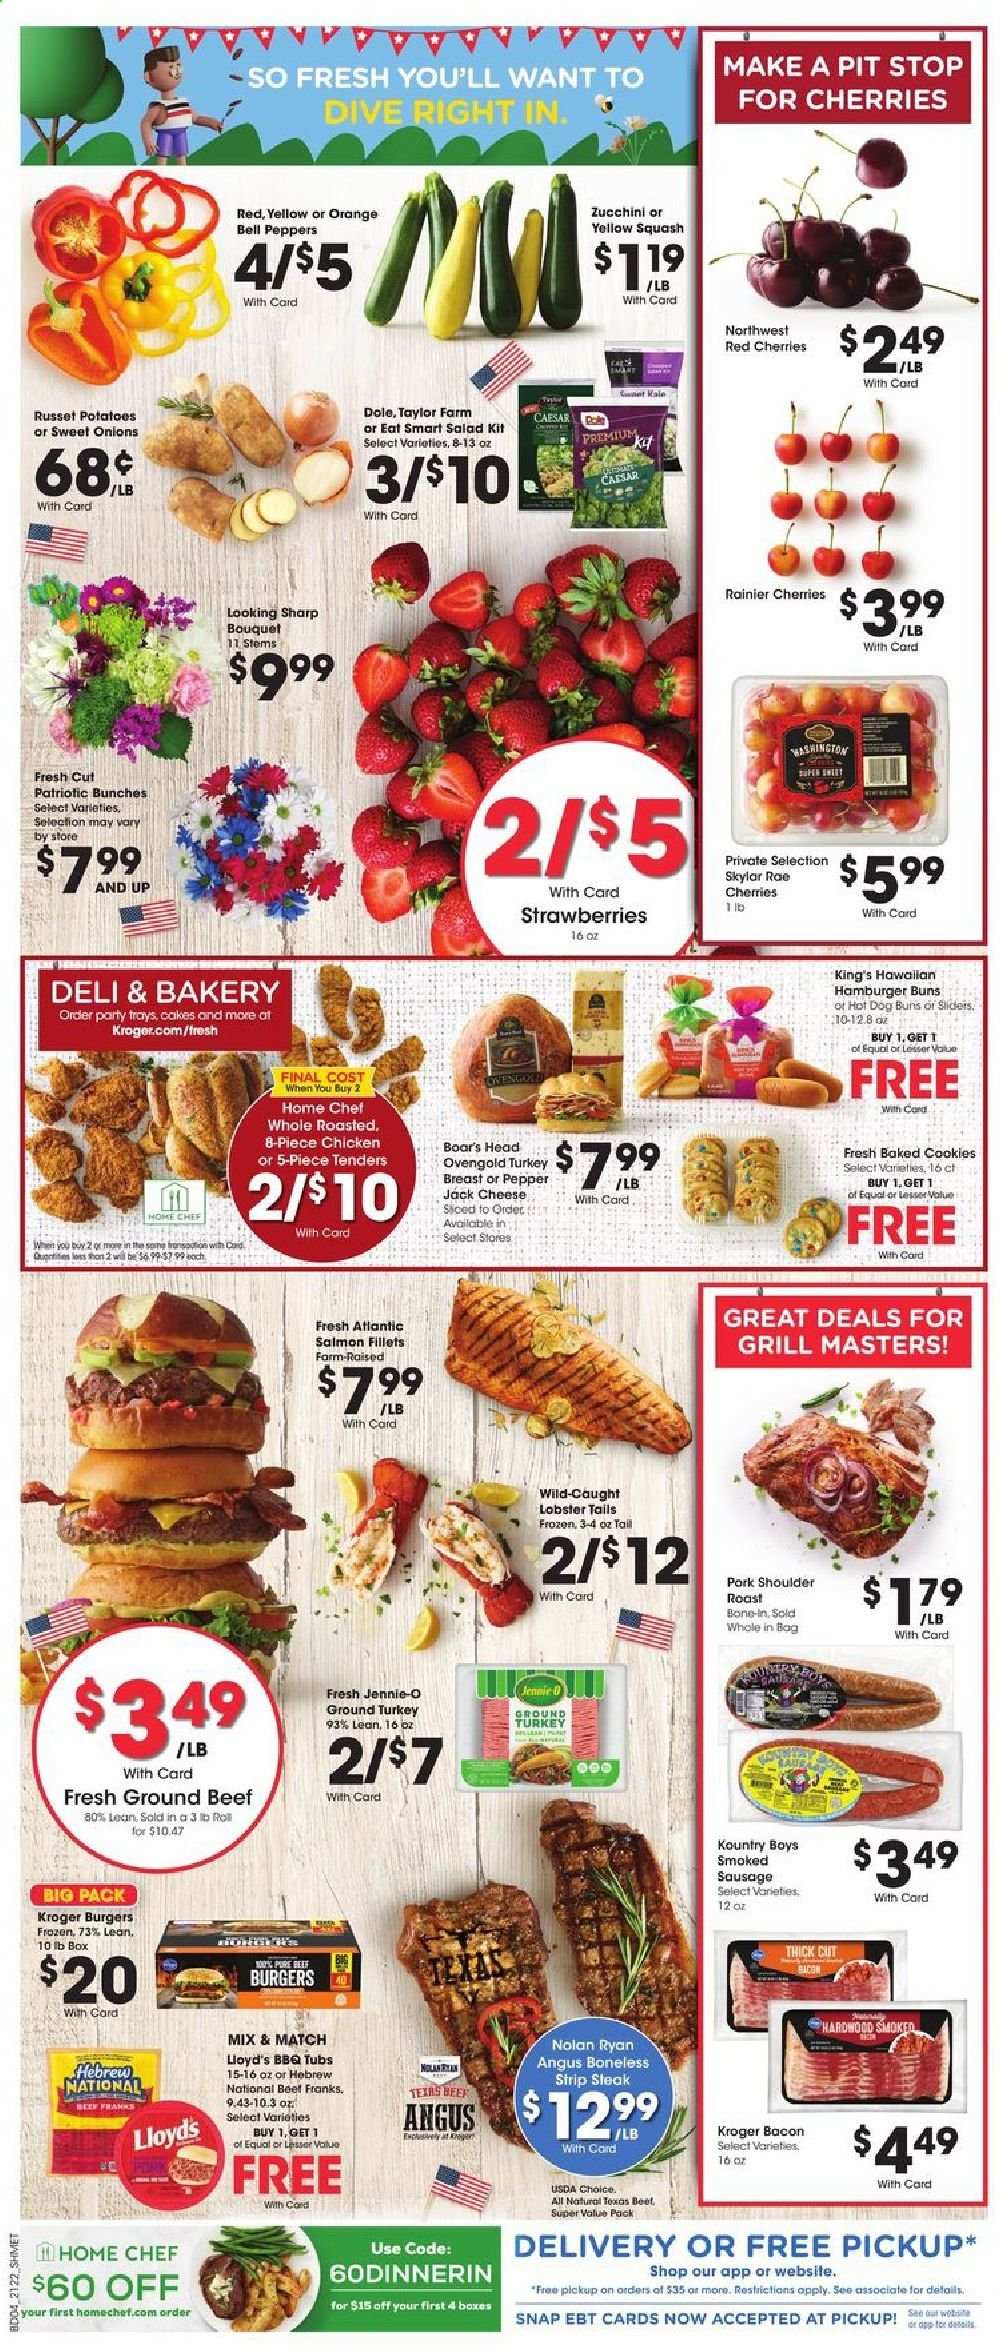 thumbnail - Kroger Flyer - 06/30/2021 - 07/06/2021 - Sales products - cake, buns, burger buns, bell peppers, russet potatoes, potatoes, salad, Dole, peppers, yellow squash, strawberries, cherries, oranges, lobster, salmon, salmon fillet, lobster tail, beef burger, bacon, smoked sausage, Pepper Jack cheese, cheese, cookies, ground turkey, turkey breast, beef meat, ground beef, steak, striploin steak, pork meat, pork shoulder, Sharp, bunches, bouquet. Page 8.